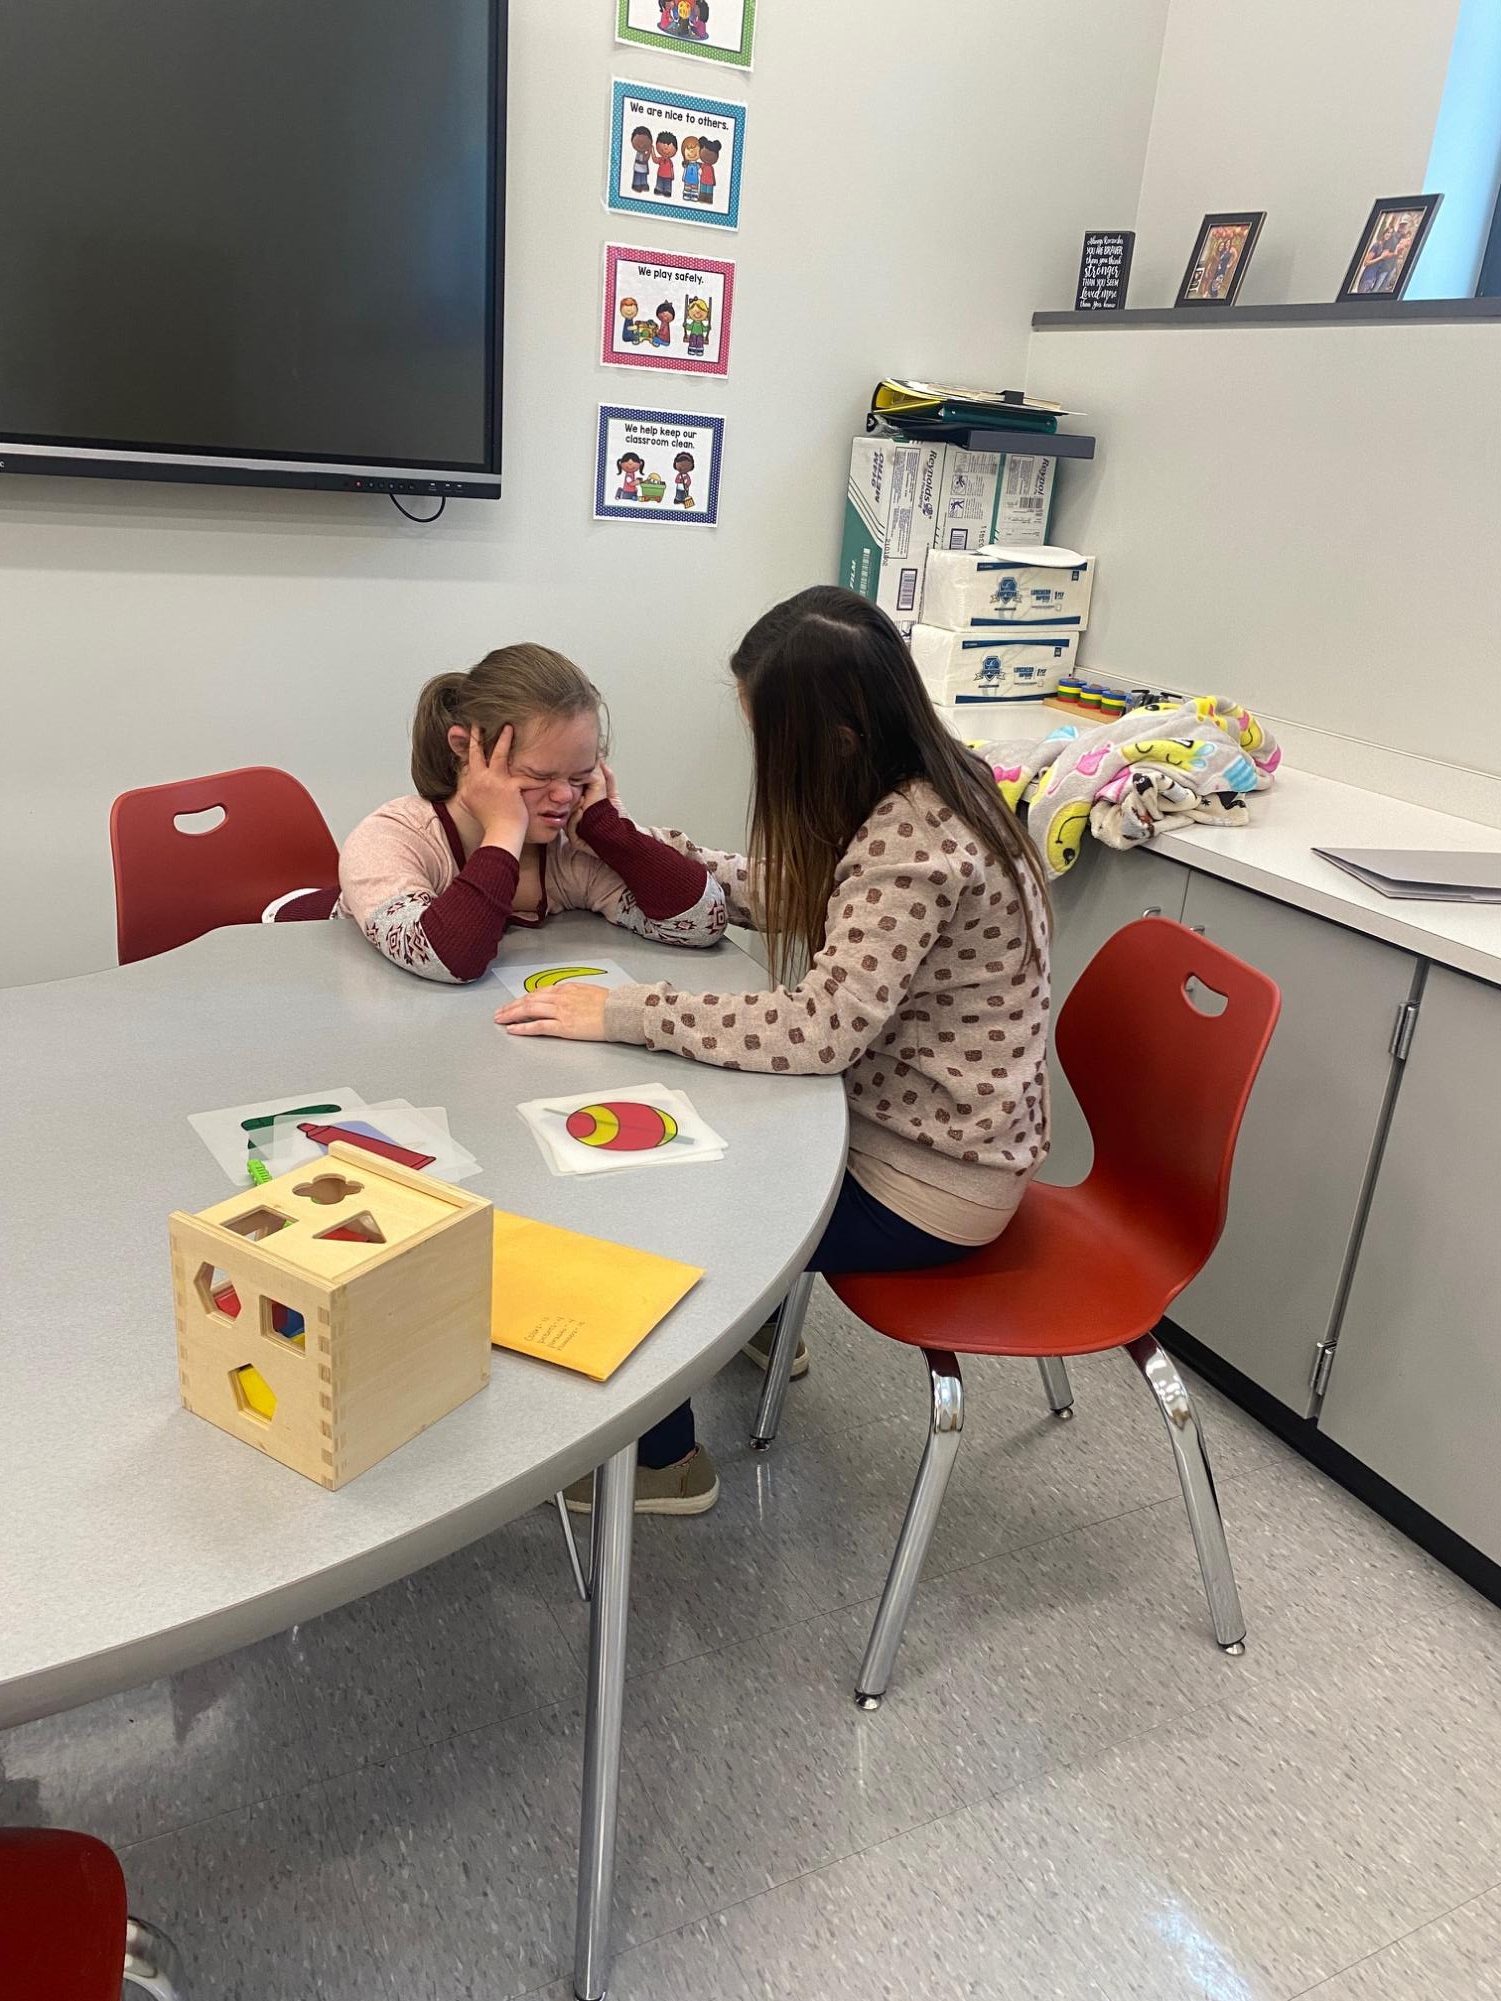 A helping hand. Kaylee Matish helps calm a student down after a sudden adjustment. The student was crying because of being moved without warning but was comforted by Matish.